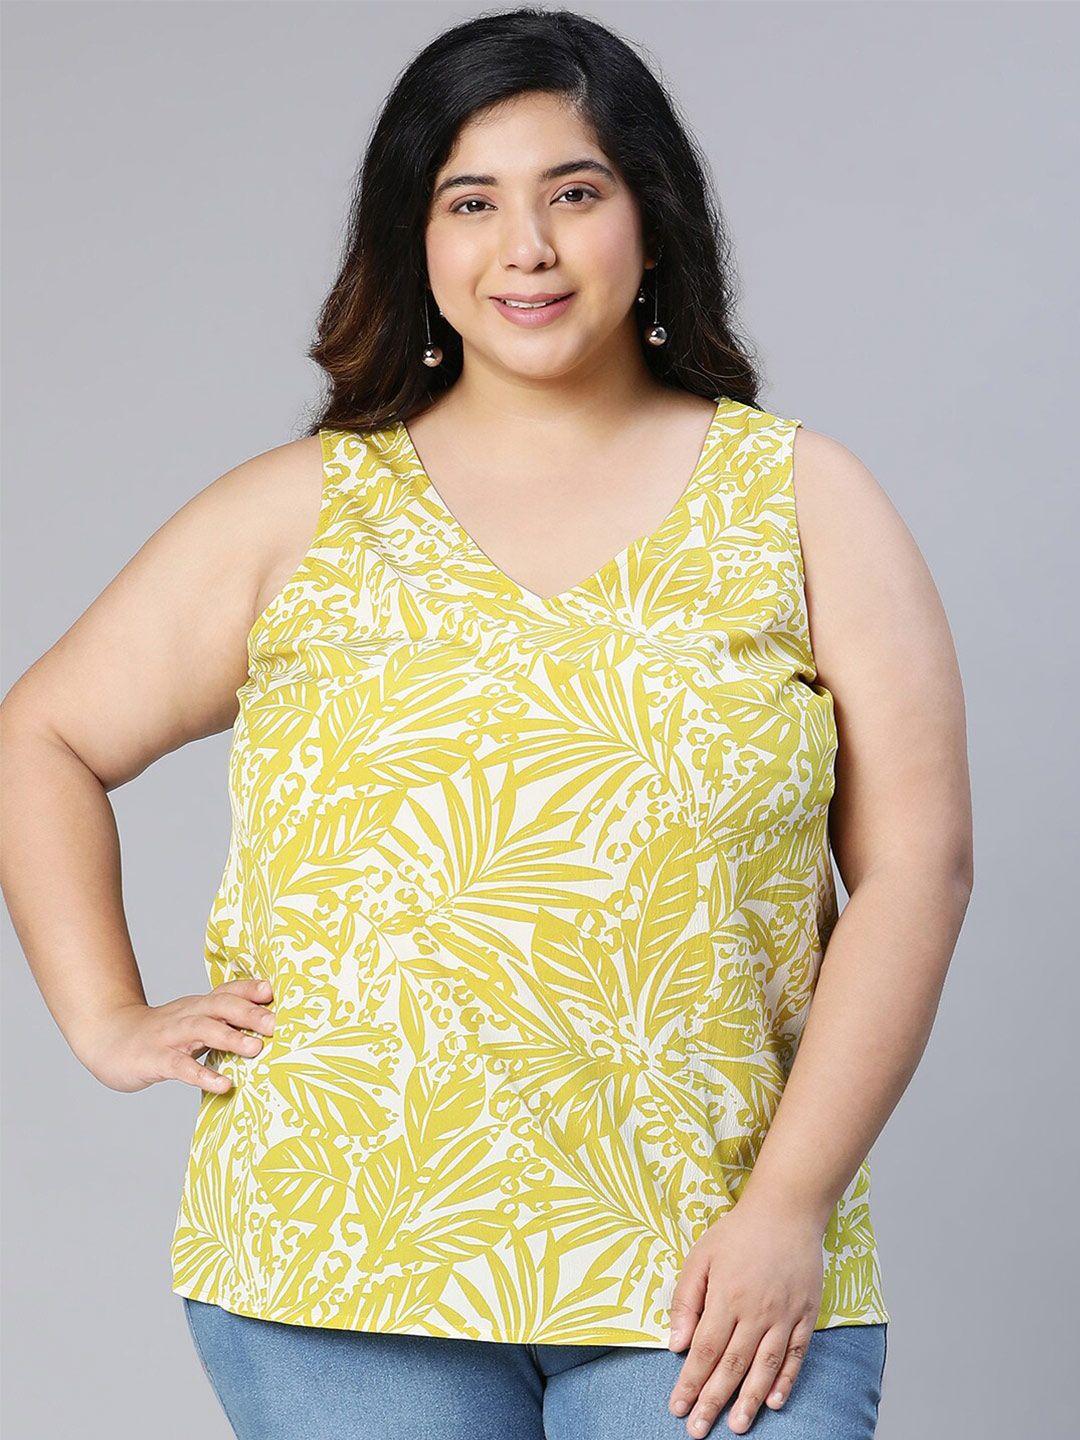 oxolloxo-plus-size-tropical-print-crepe-top